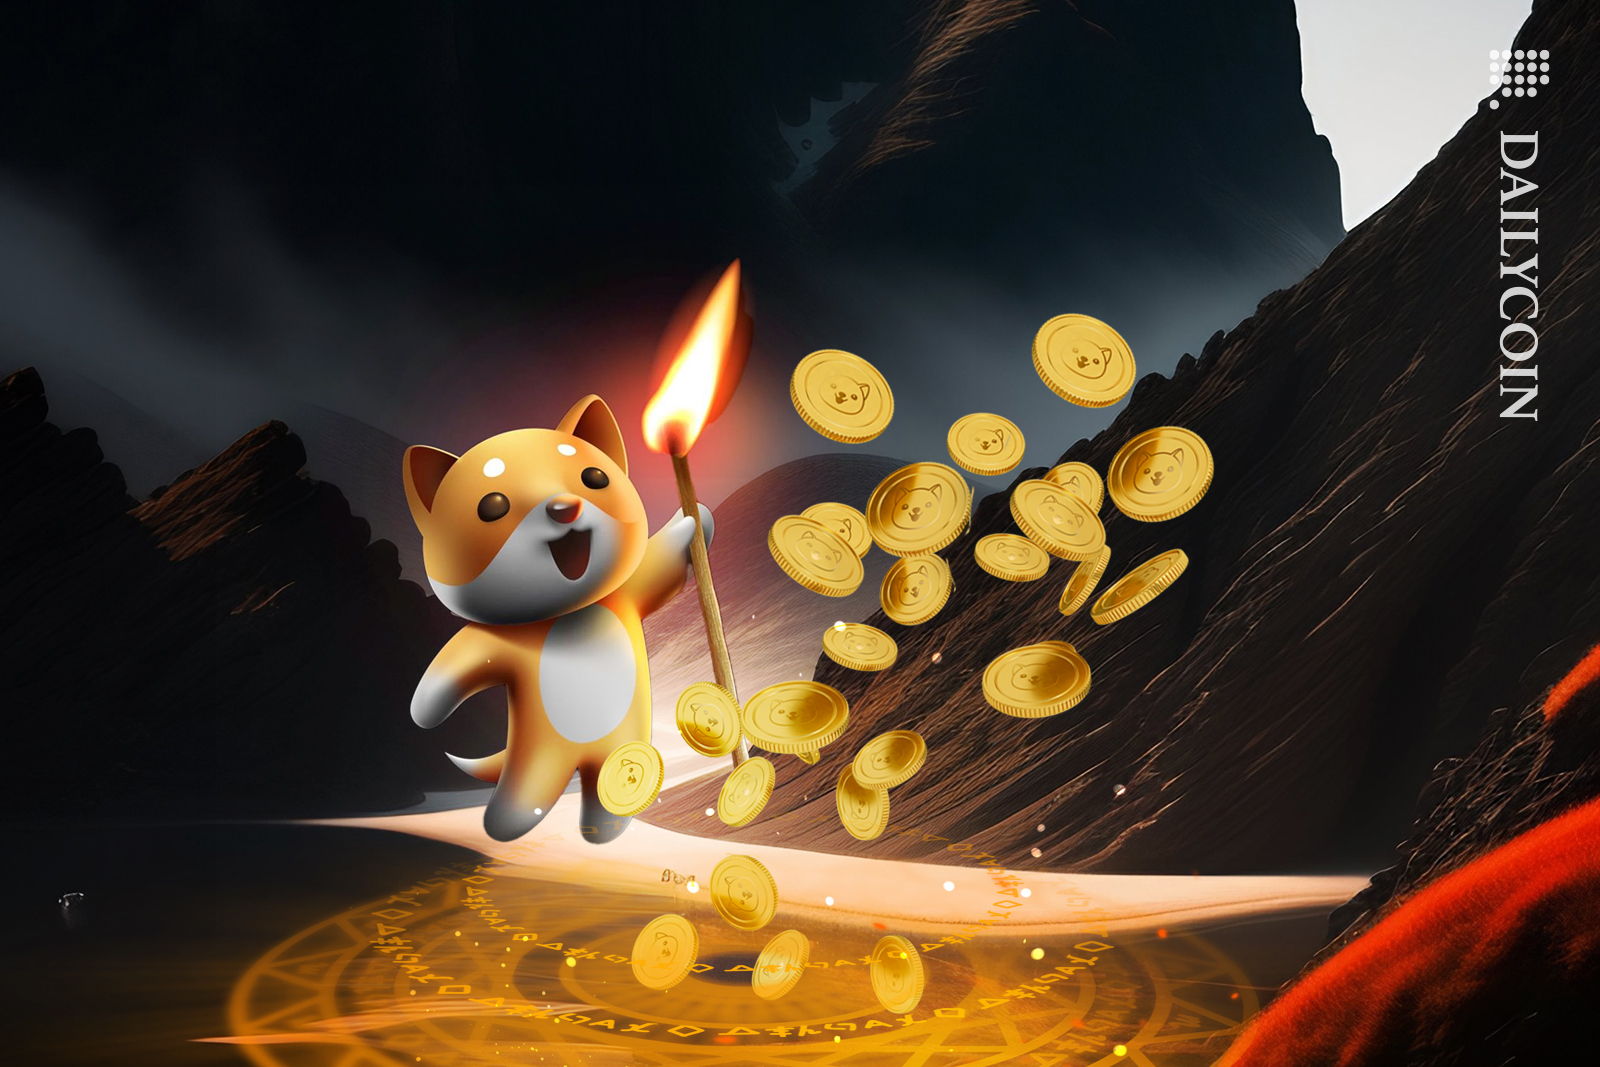 Baby shiba on a track surrounded by mountains is holding a match stick and discovering a magic portal with Babydoge coins going into the air.